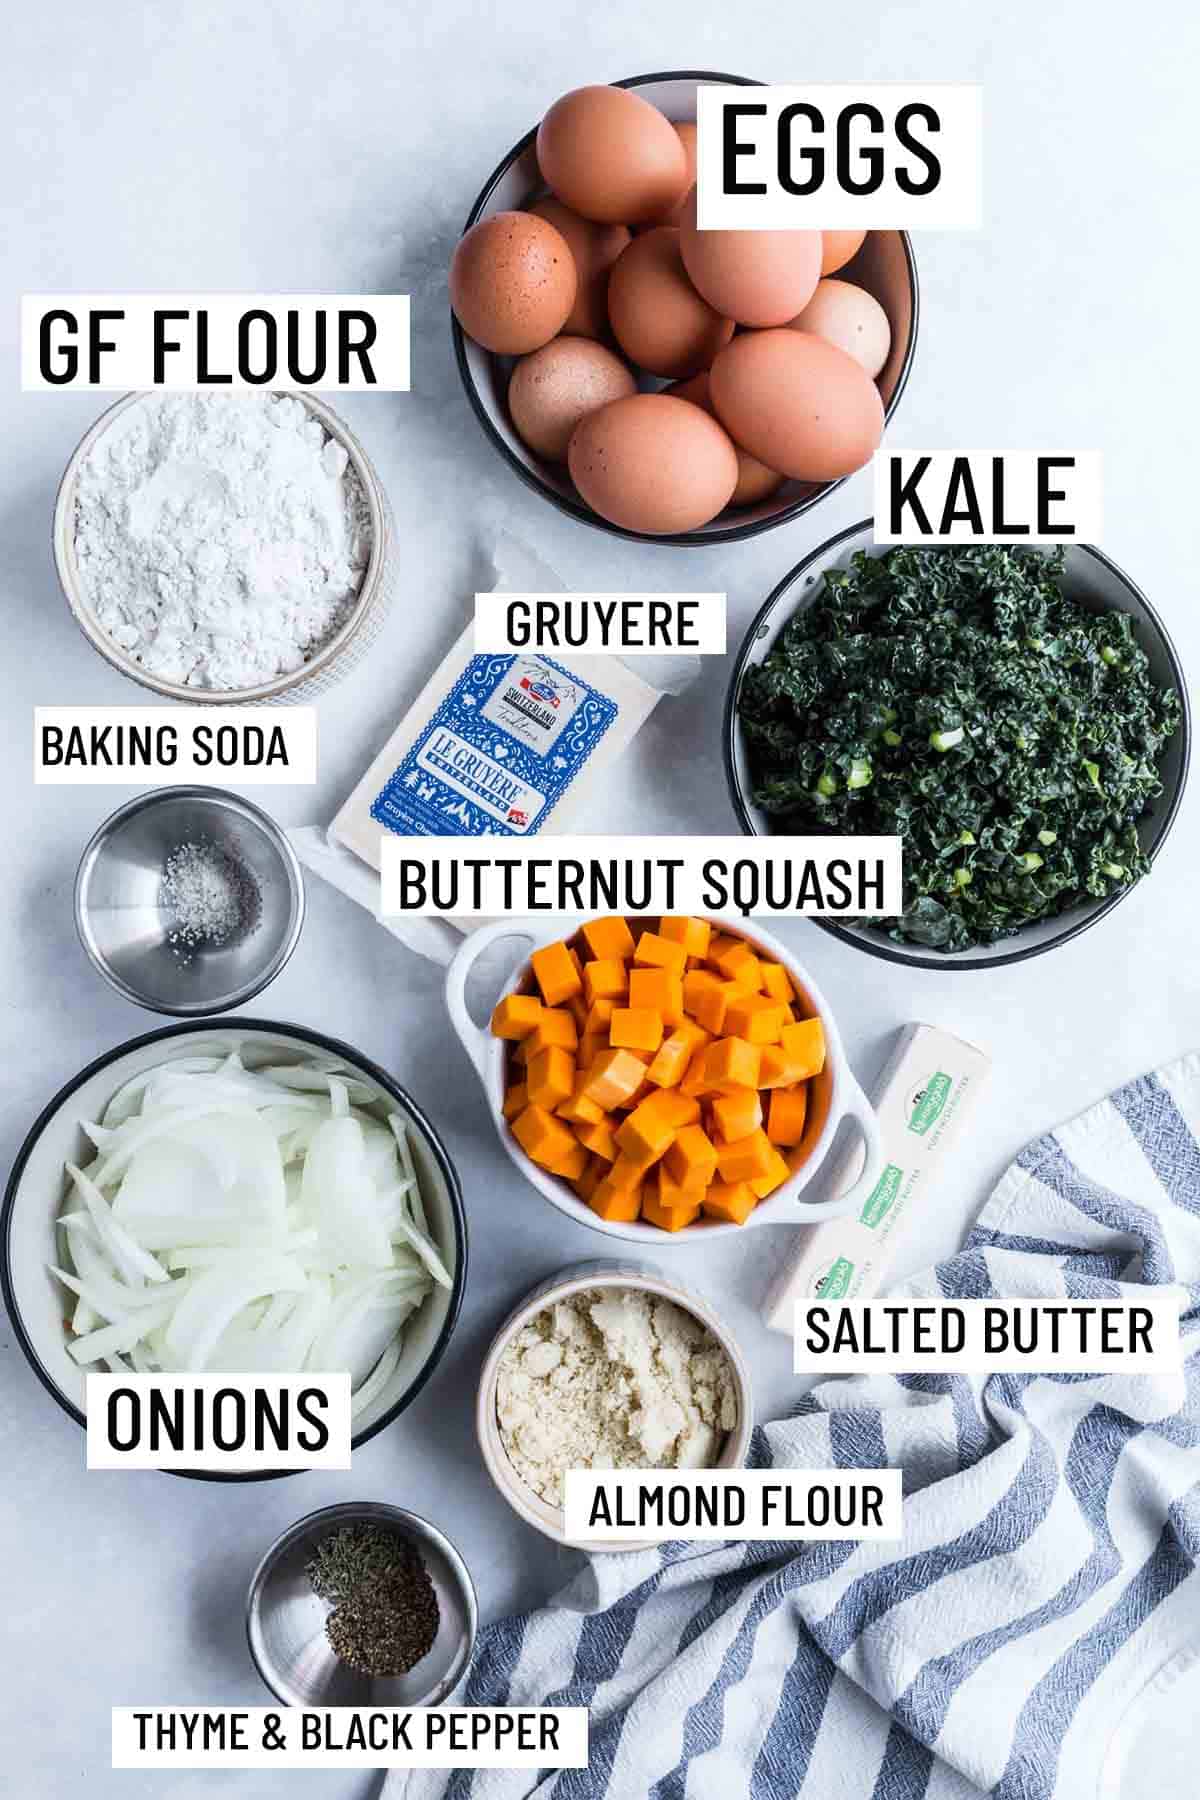 Birds eye view of portioned ingredients to make gluten free quiche including butternut squash, kale, almond flour, salted butter, onions, gruyere, gluten free flour, and eggs. 